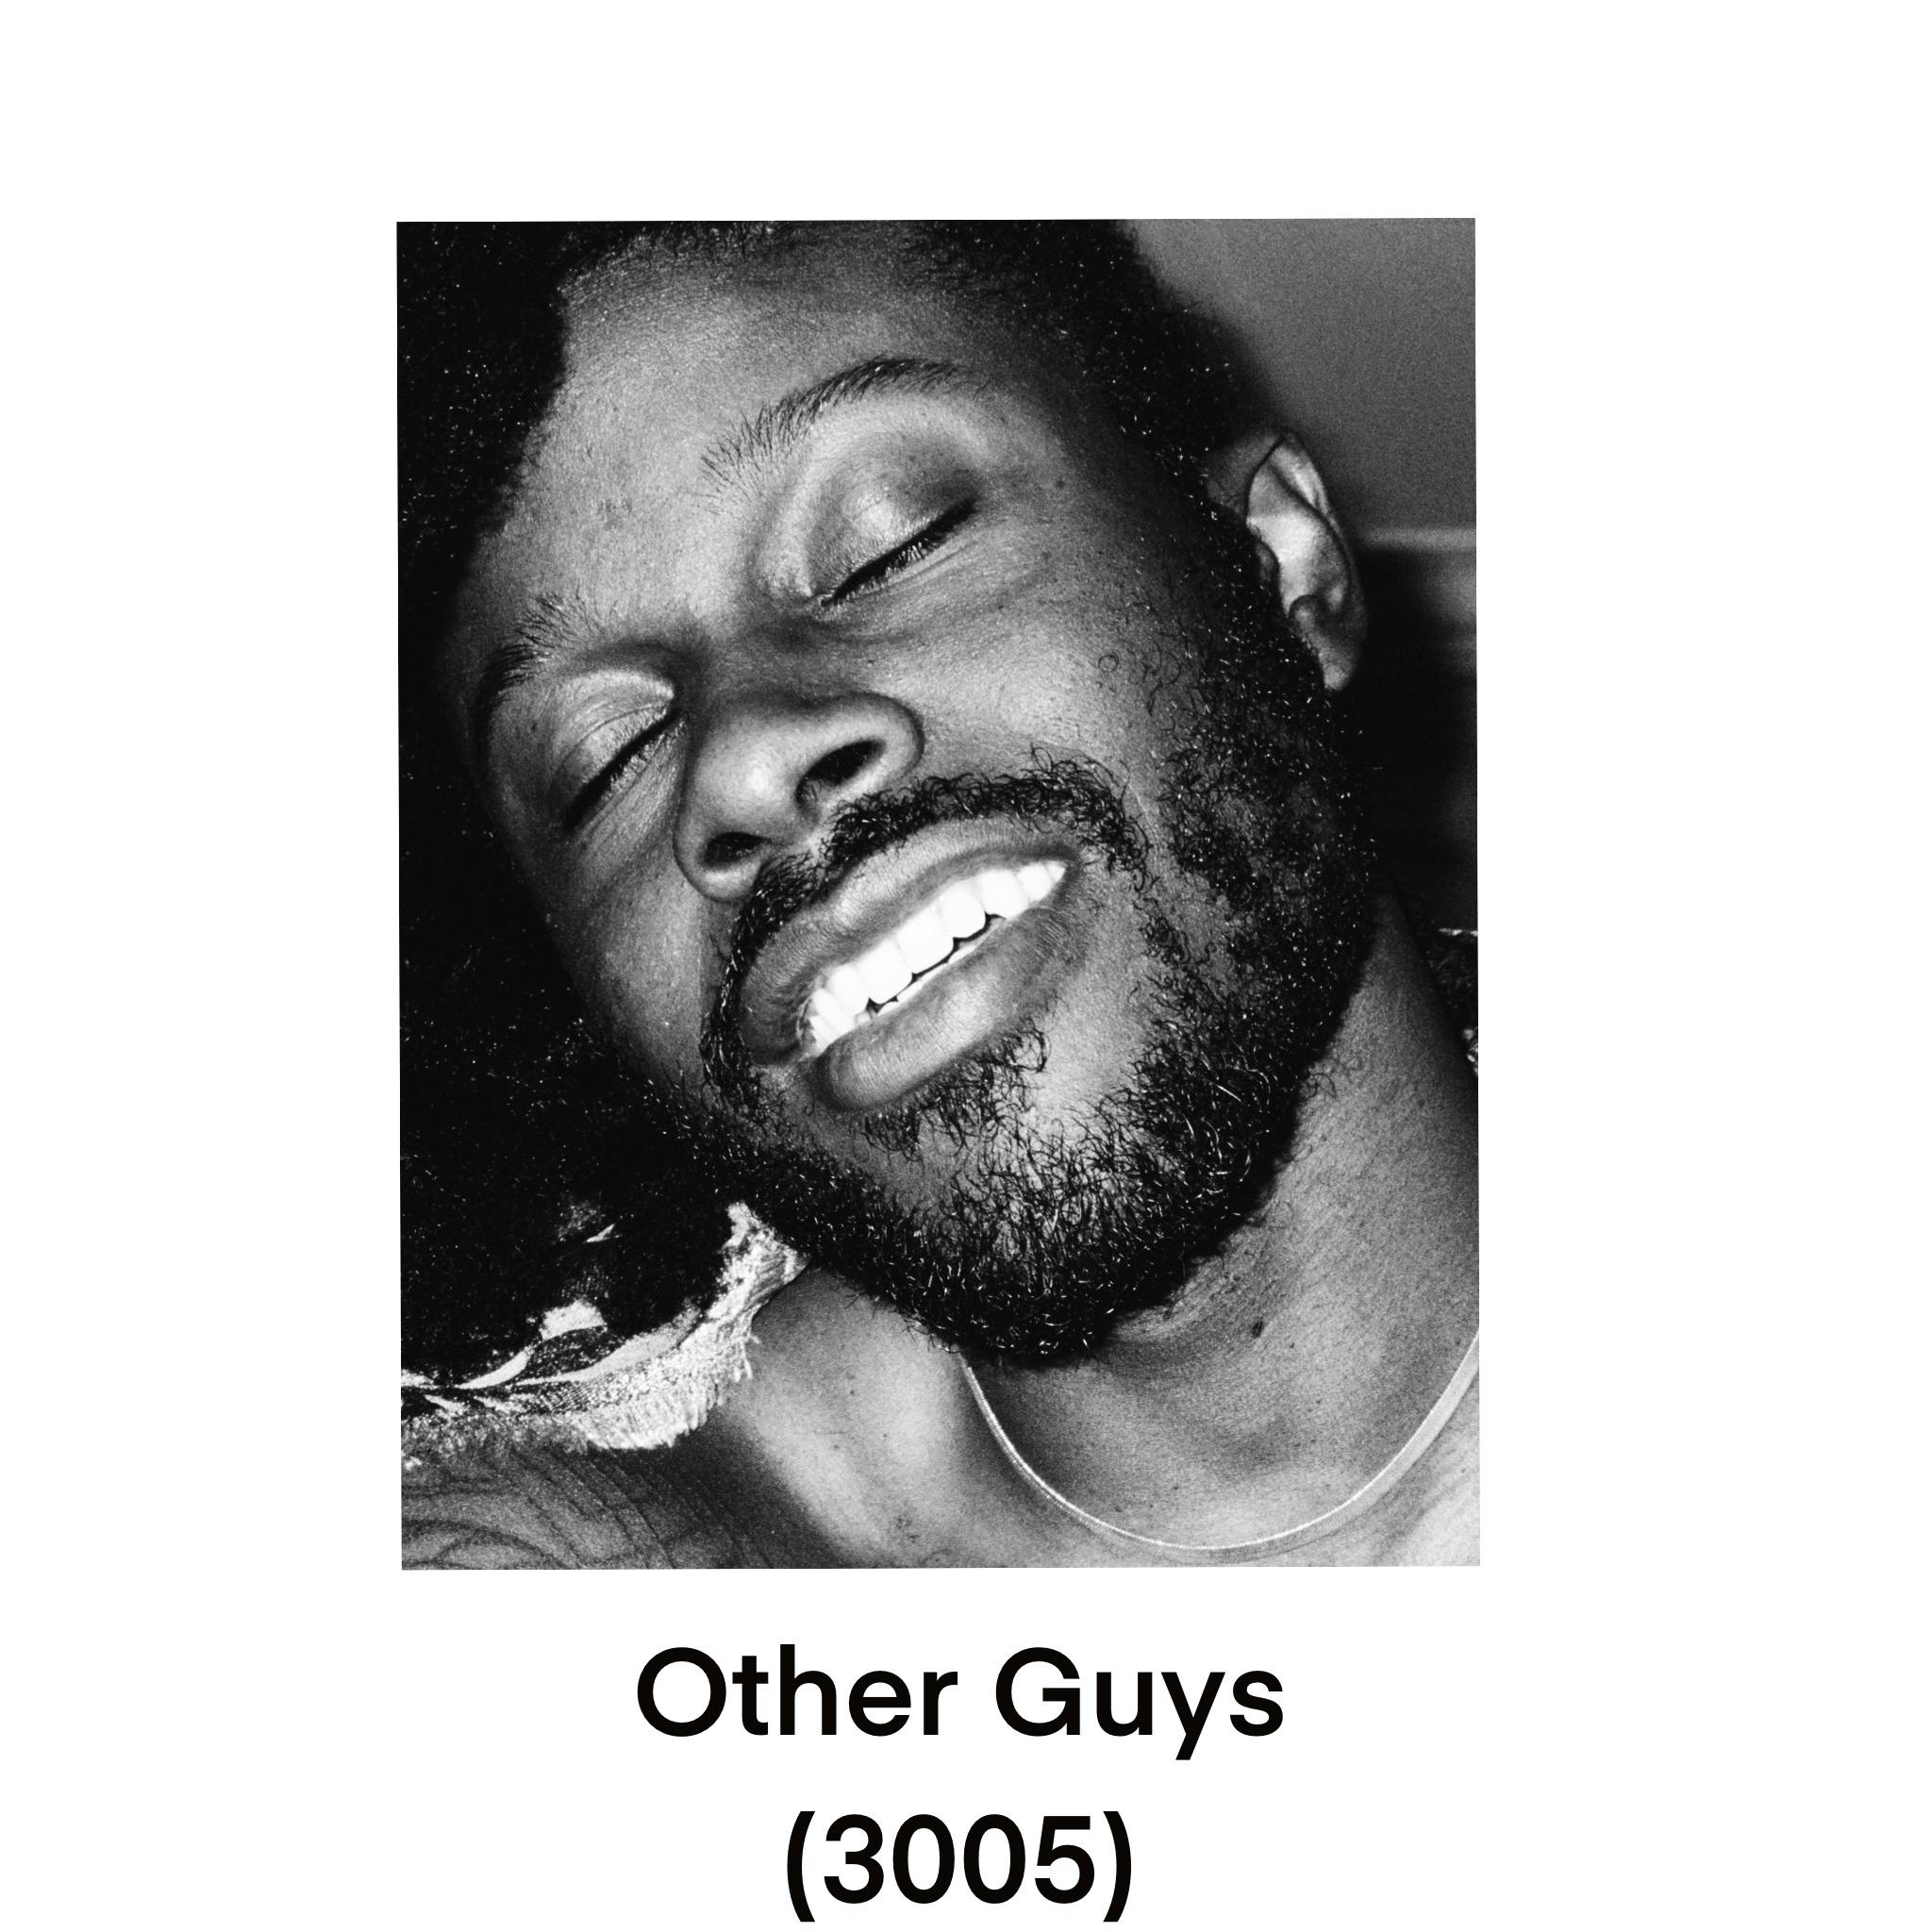 Other Guys (3005)